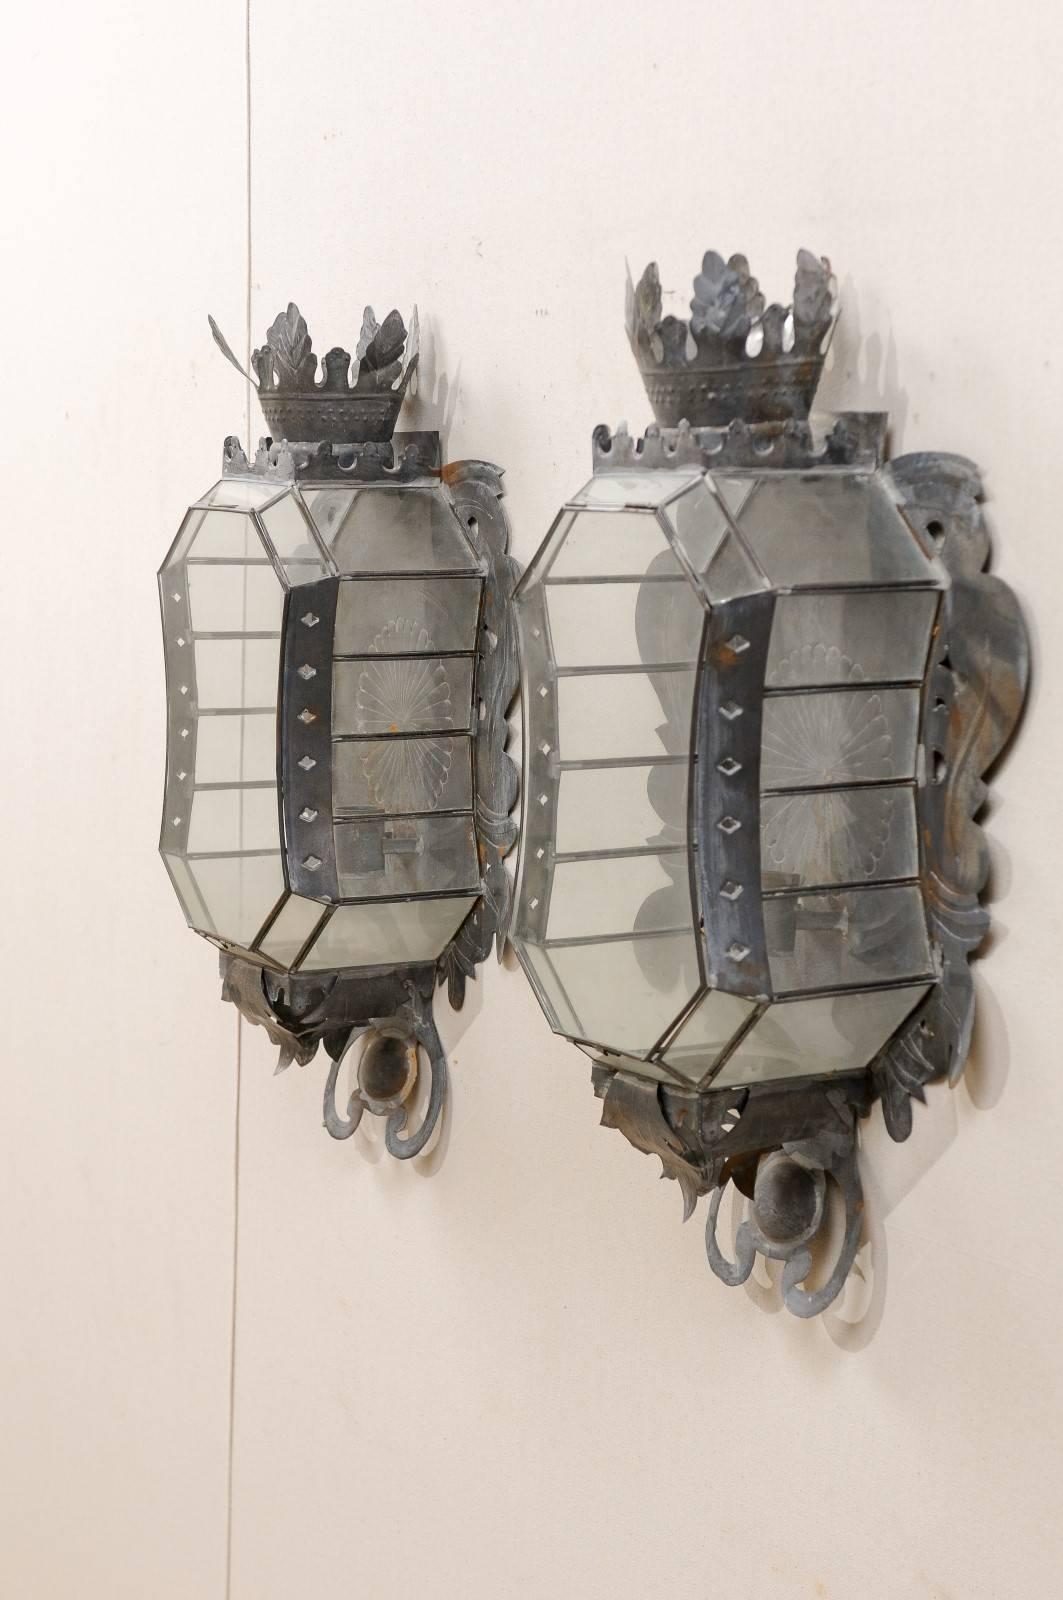 Hand-Crafted Pair of Mexican Single Candle Folk Art Sconces, Handcrafted from Tin & Glass